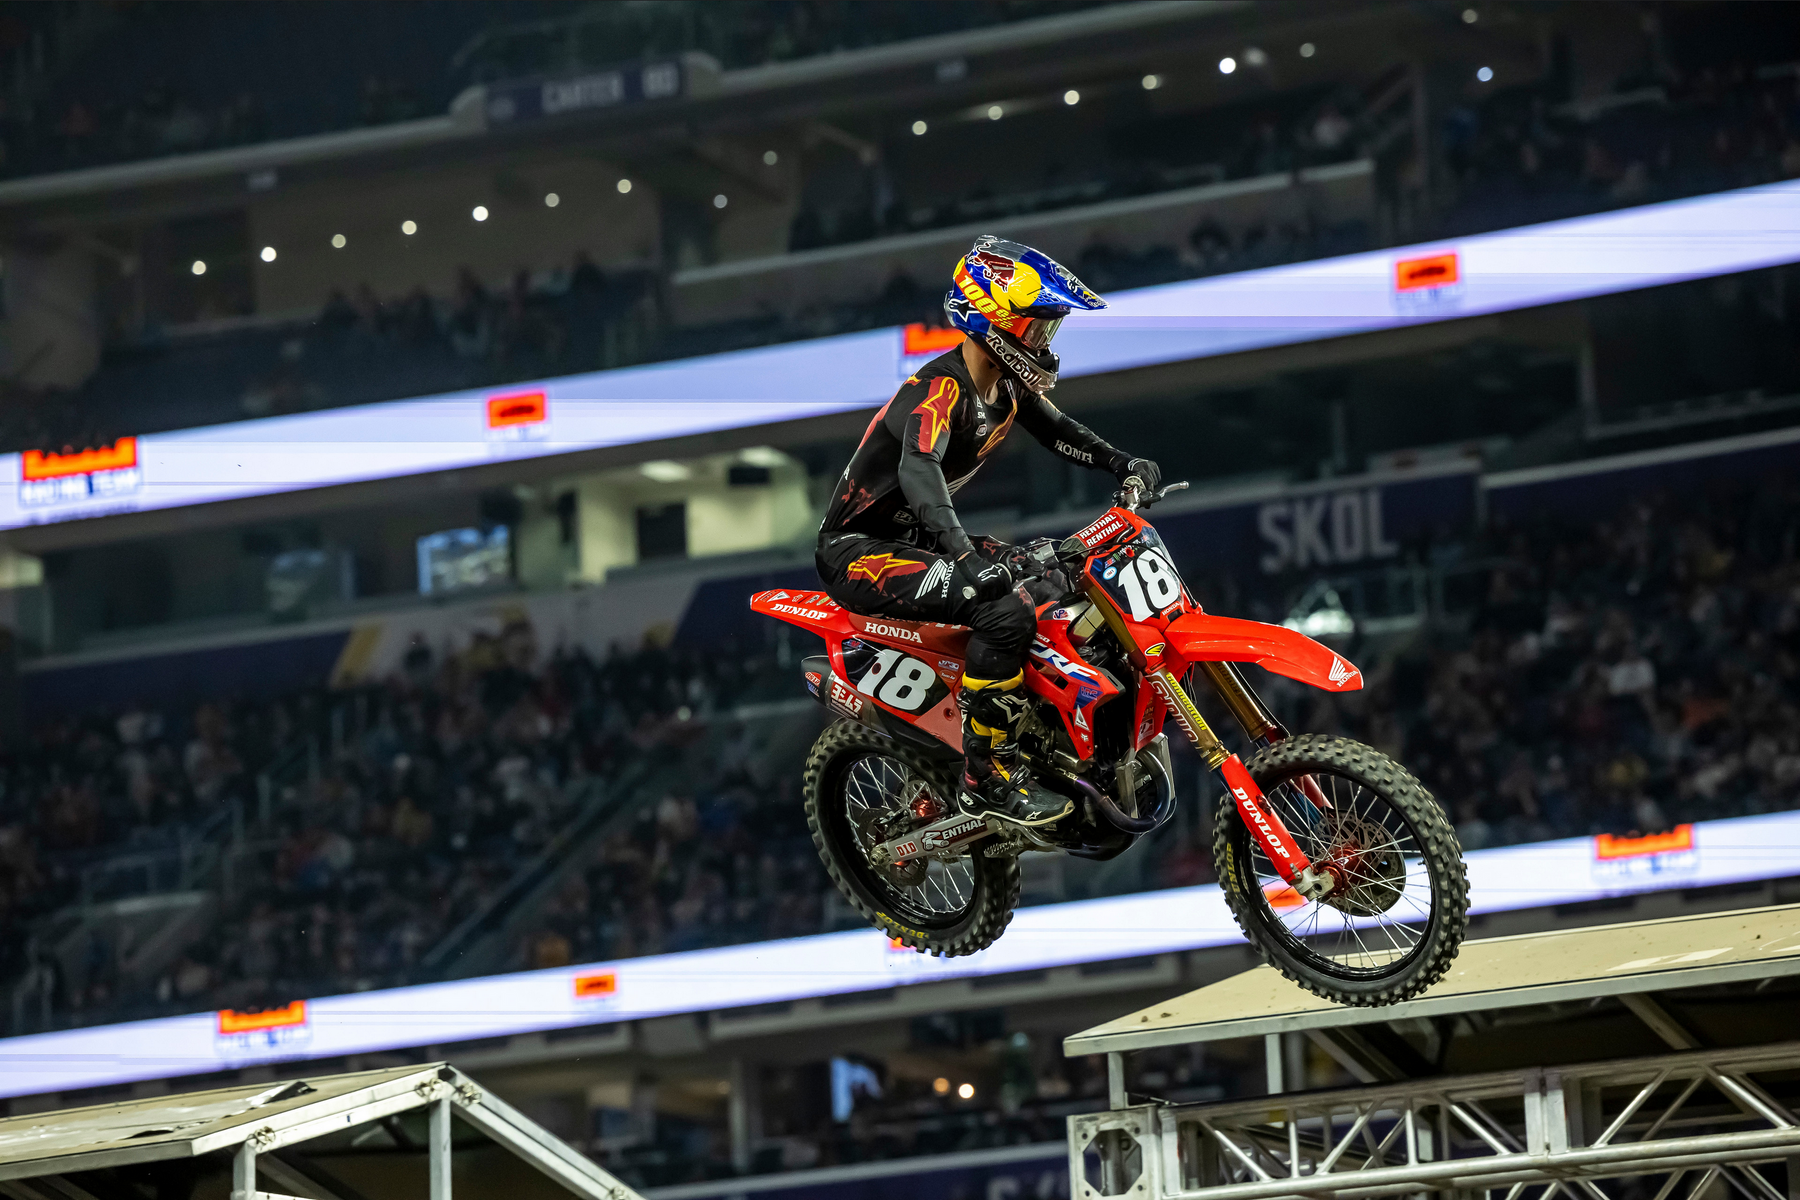 DOMINANT JETT LAWRENCE TASTES SUCESS IN 250SX EAST RACES AT MINNEAPOLIS